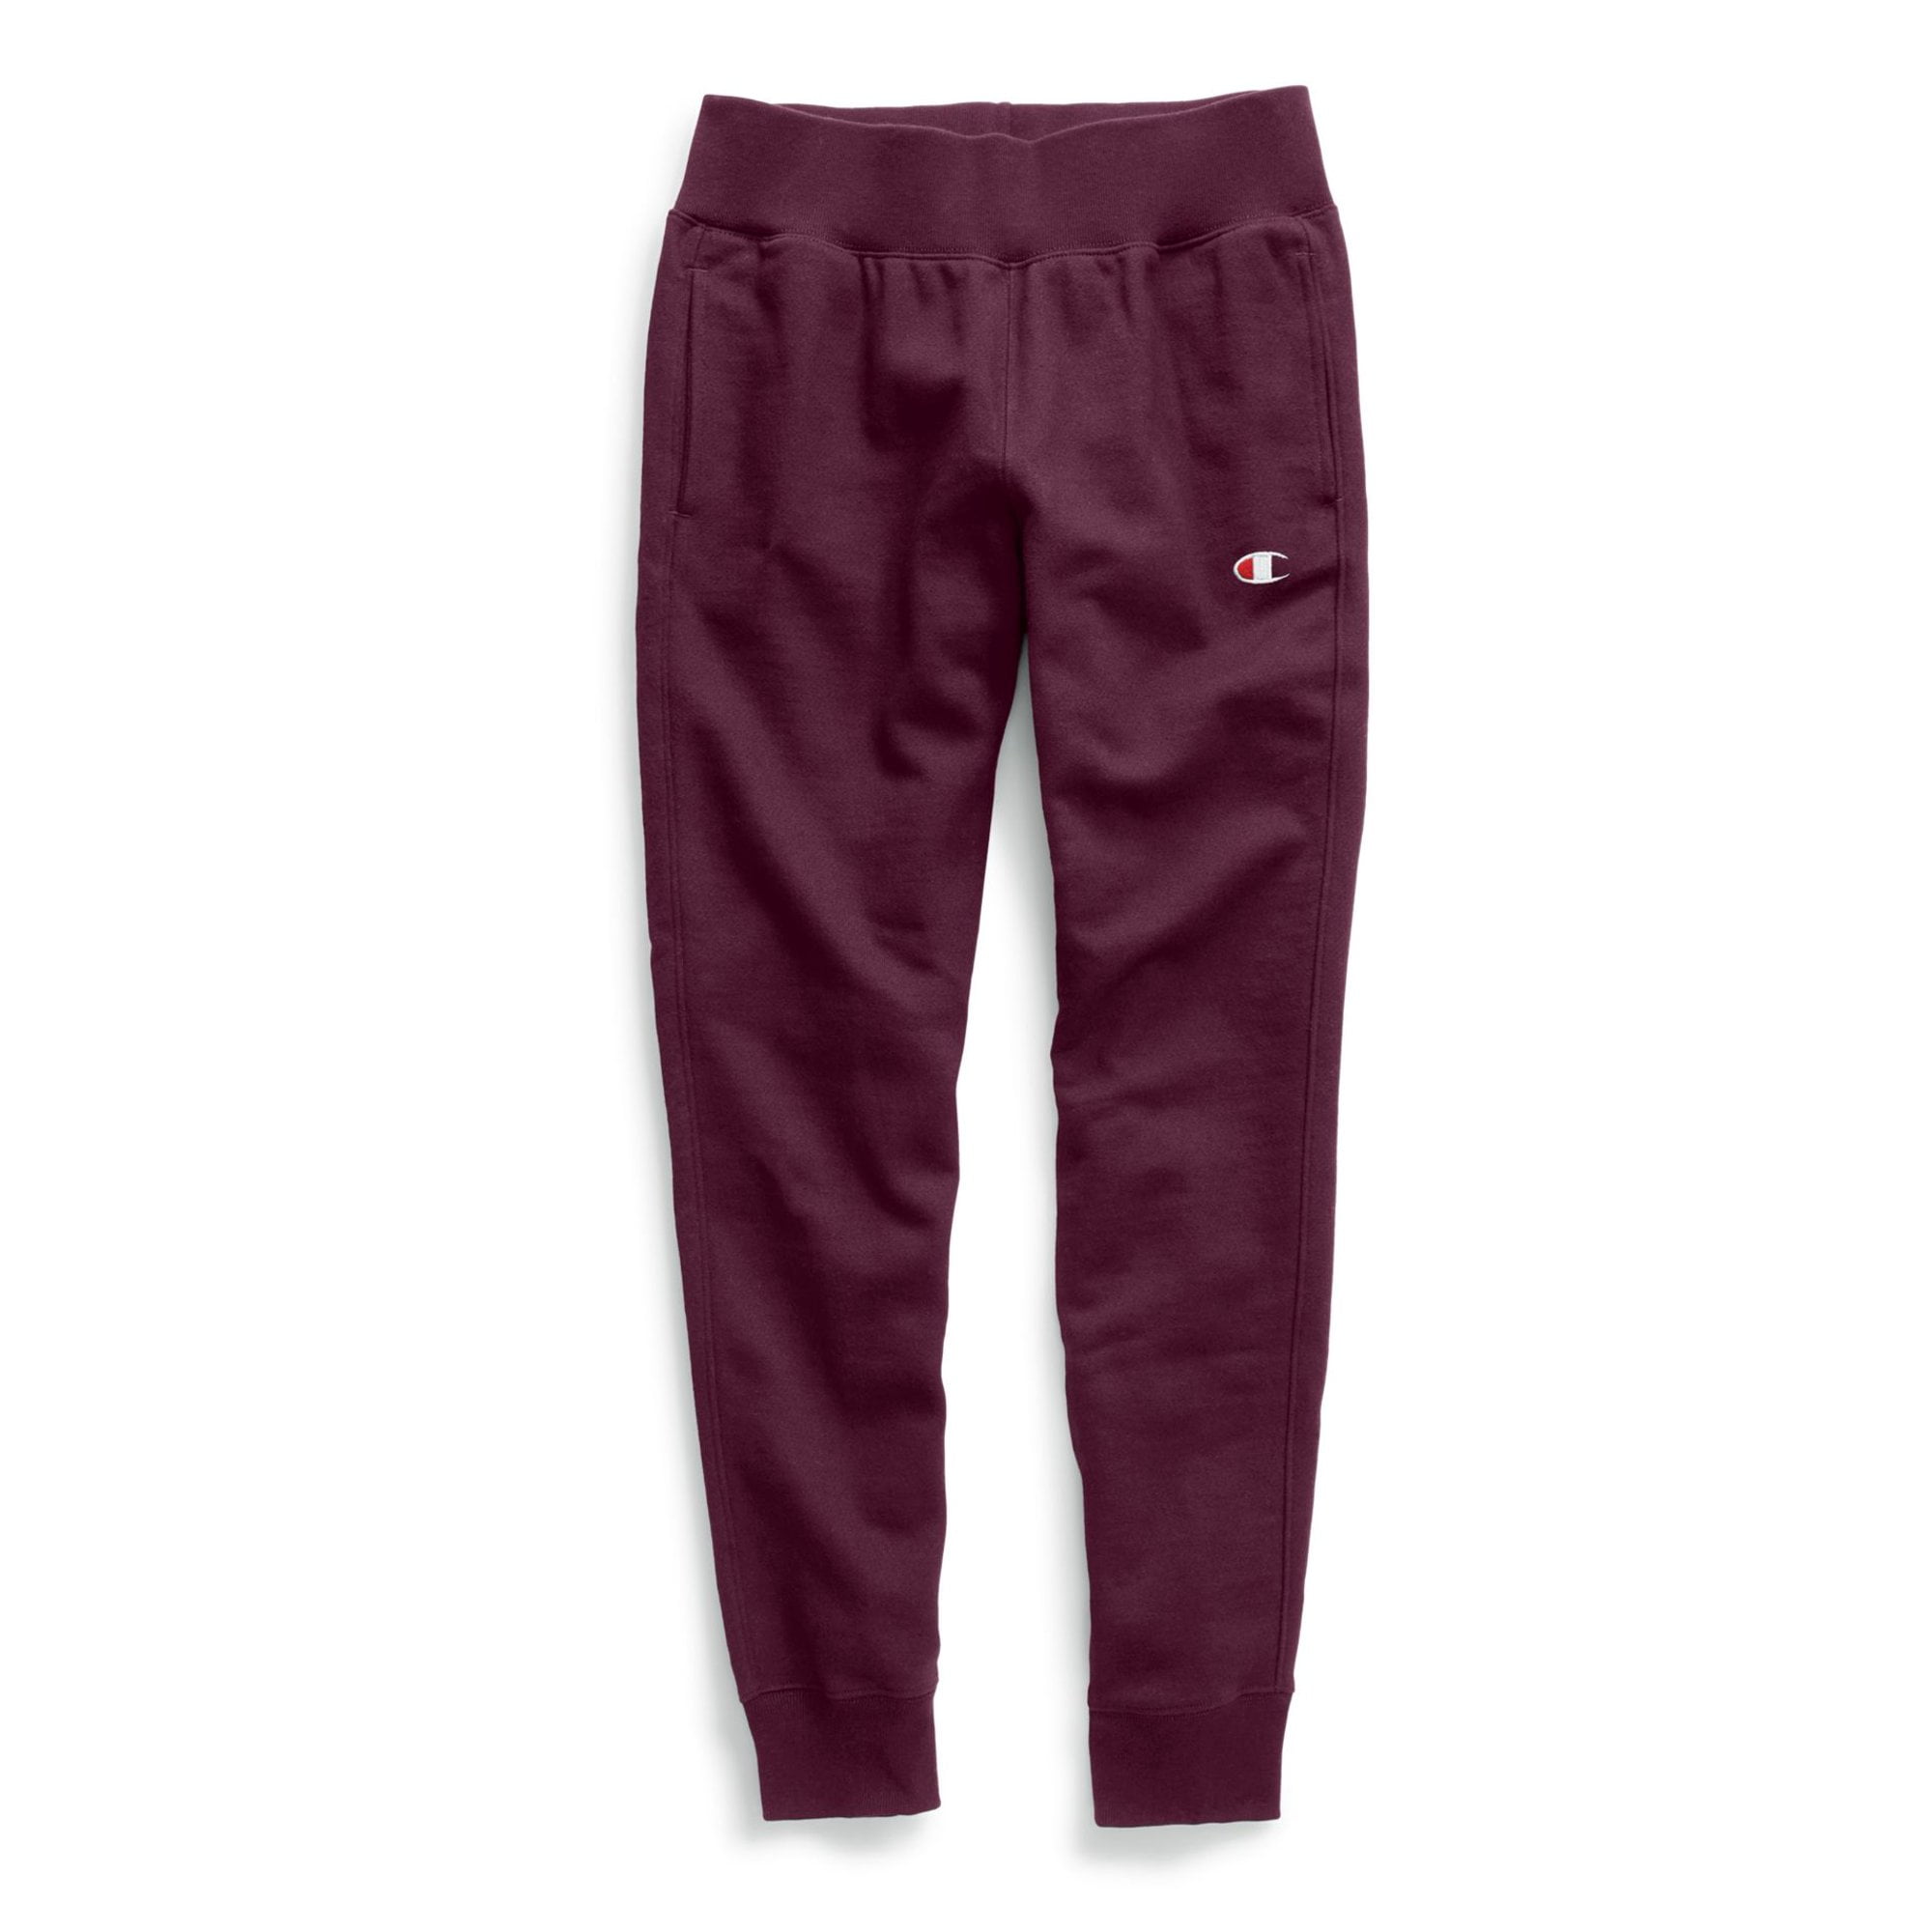 Champion LIFE Women's Reverse Weave Jogger Ladies Sweatpants - Choose Color  and Size (Imperial Indigo-y07482, X-Large) 